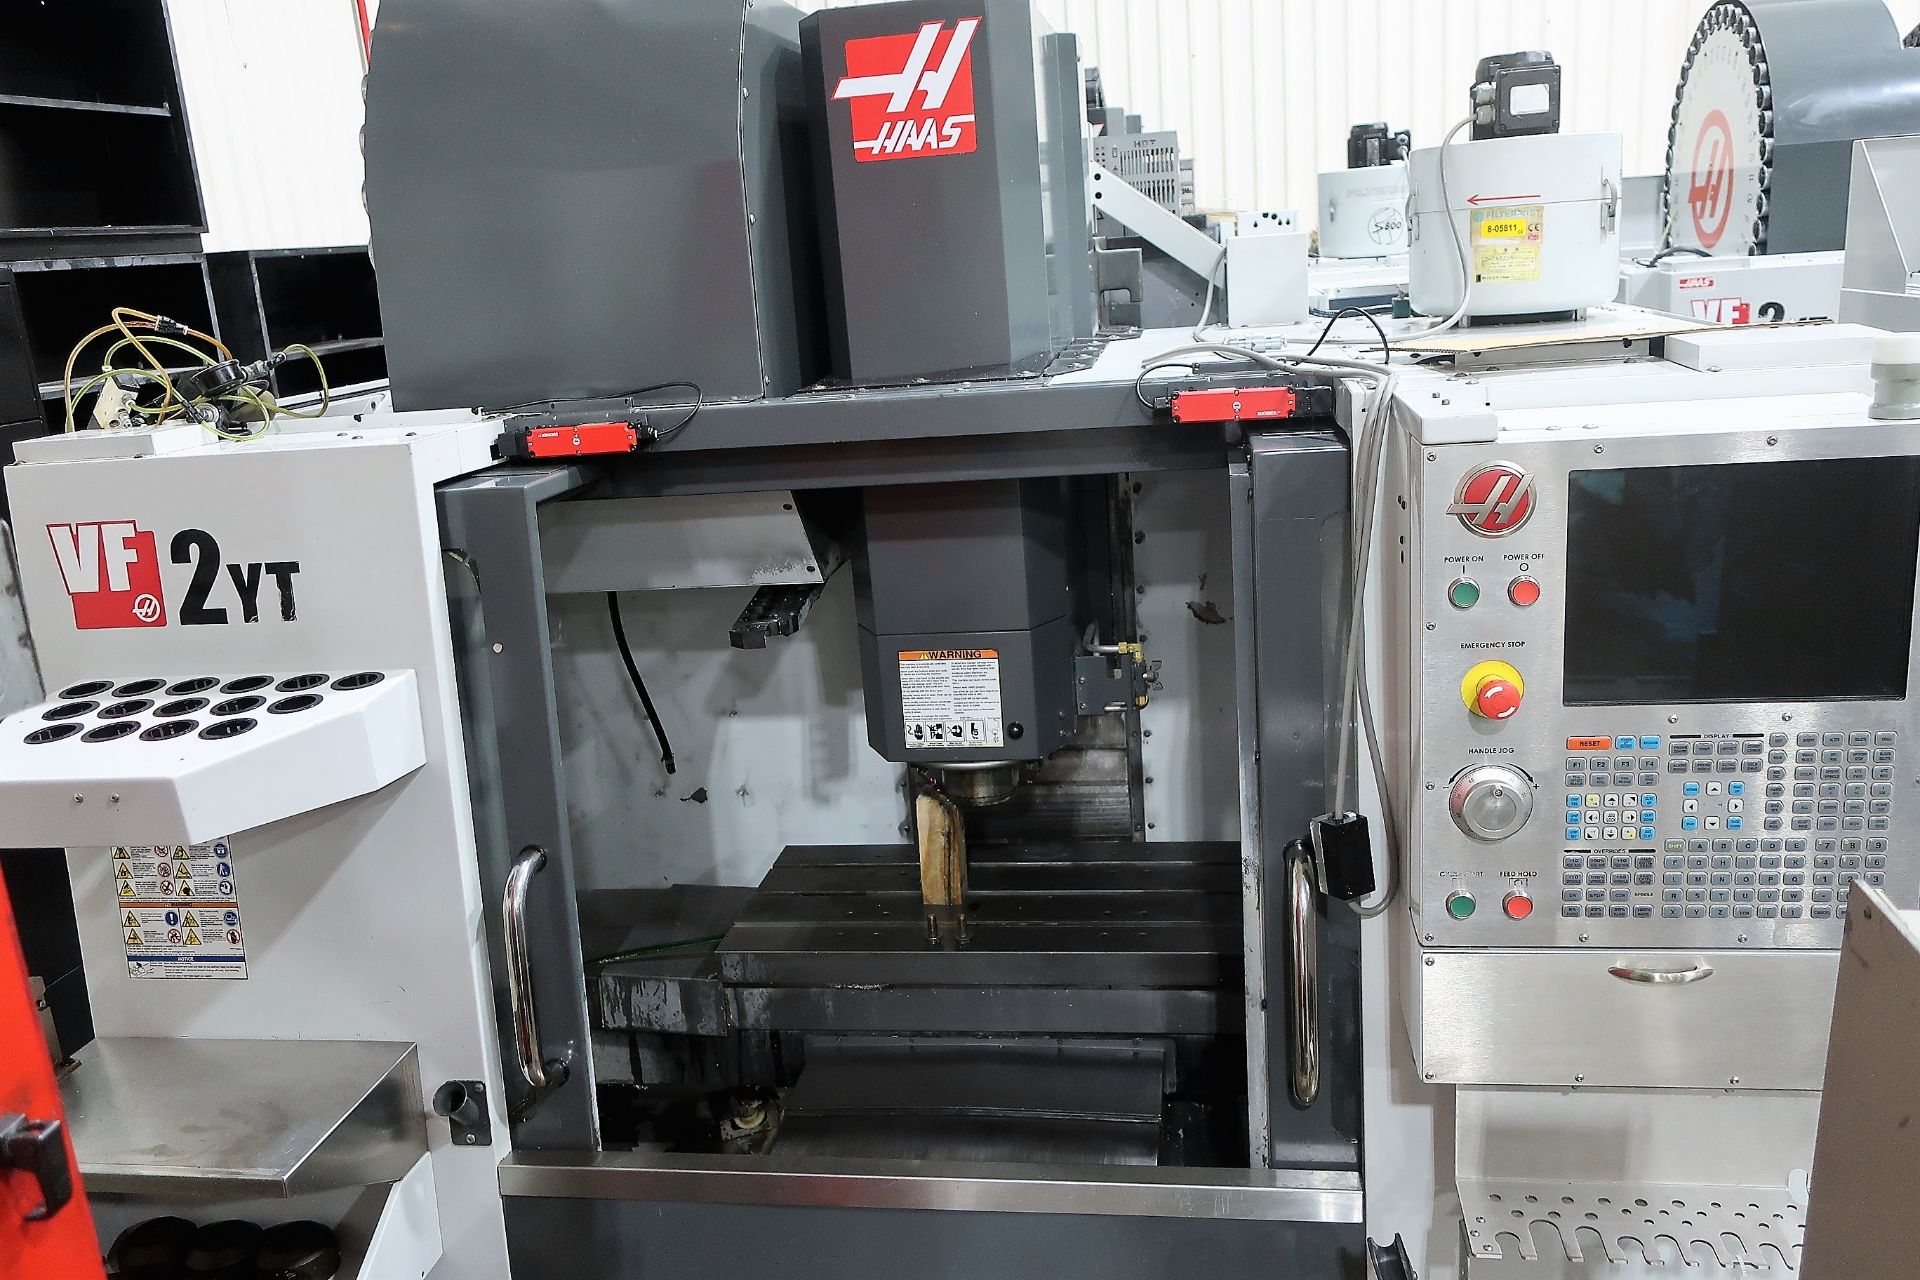 HAAS VF2-YT CNC 3-AXIS VERTICAL MACHINING CENTER, 15,000 RPM SPINDLE, S/N 1102152, NEW 2014